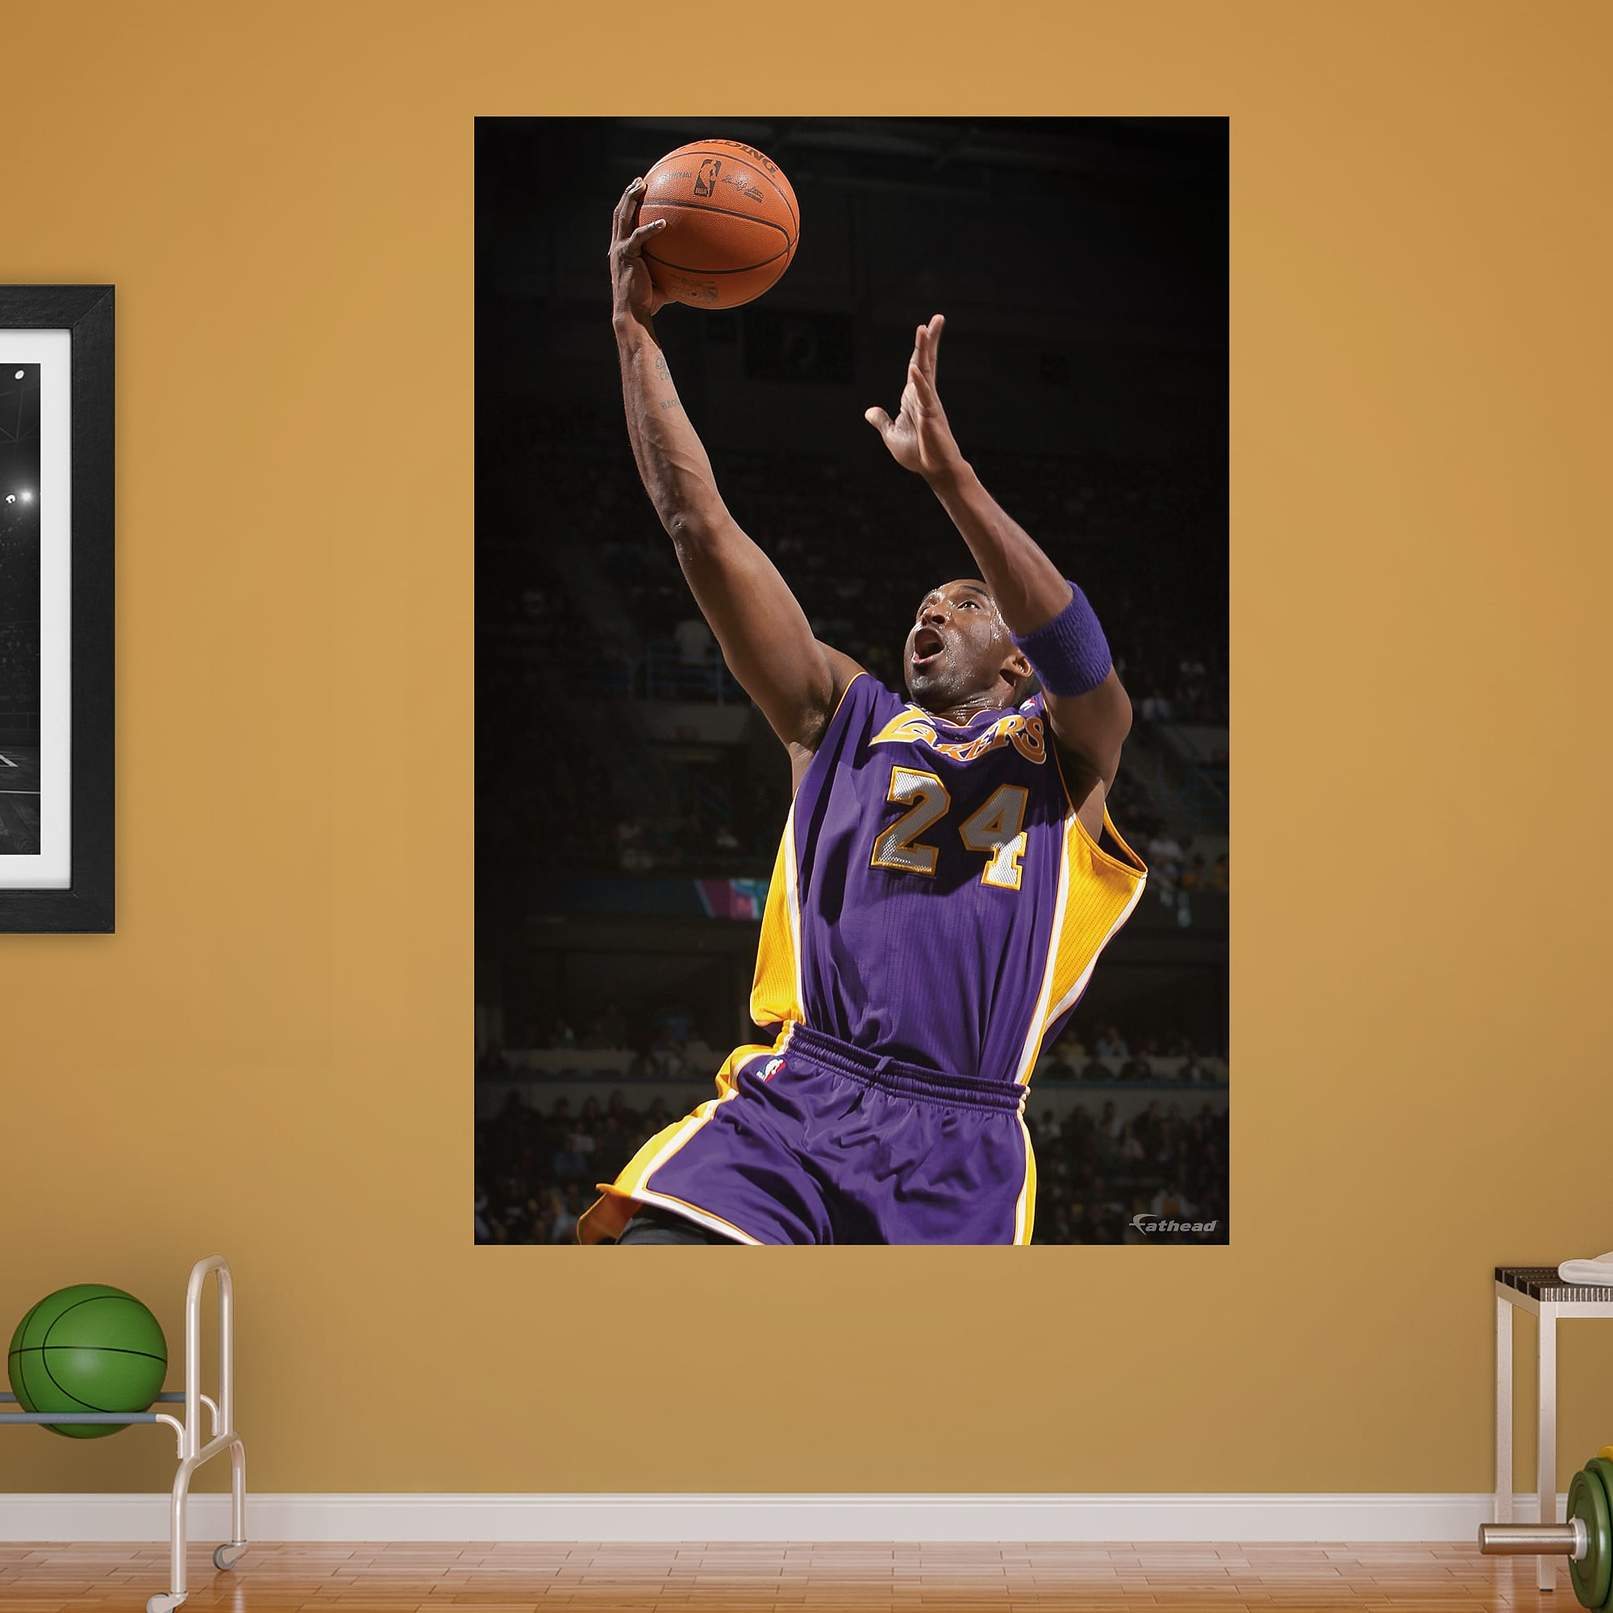 https://fathead.com/products/22-20258